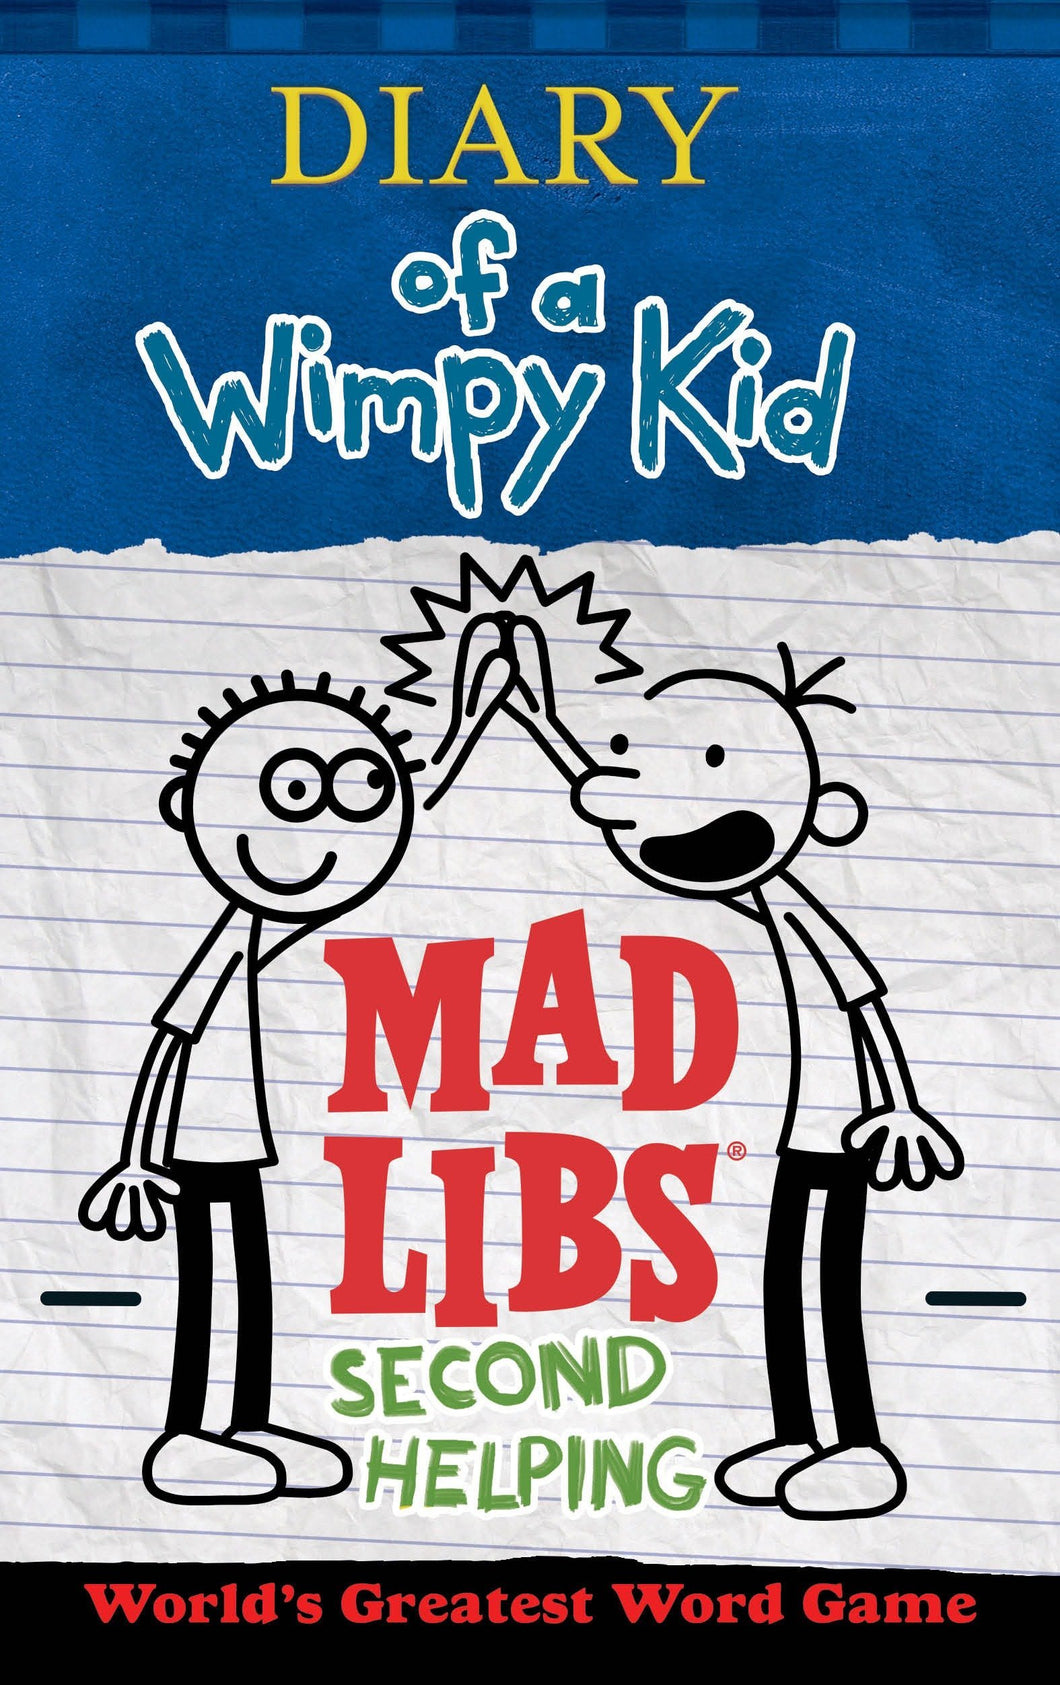 Diary of a Wimpy Kid Mad Libs - Second Helping